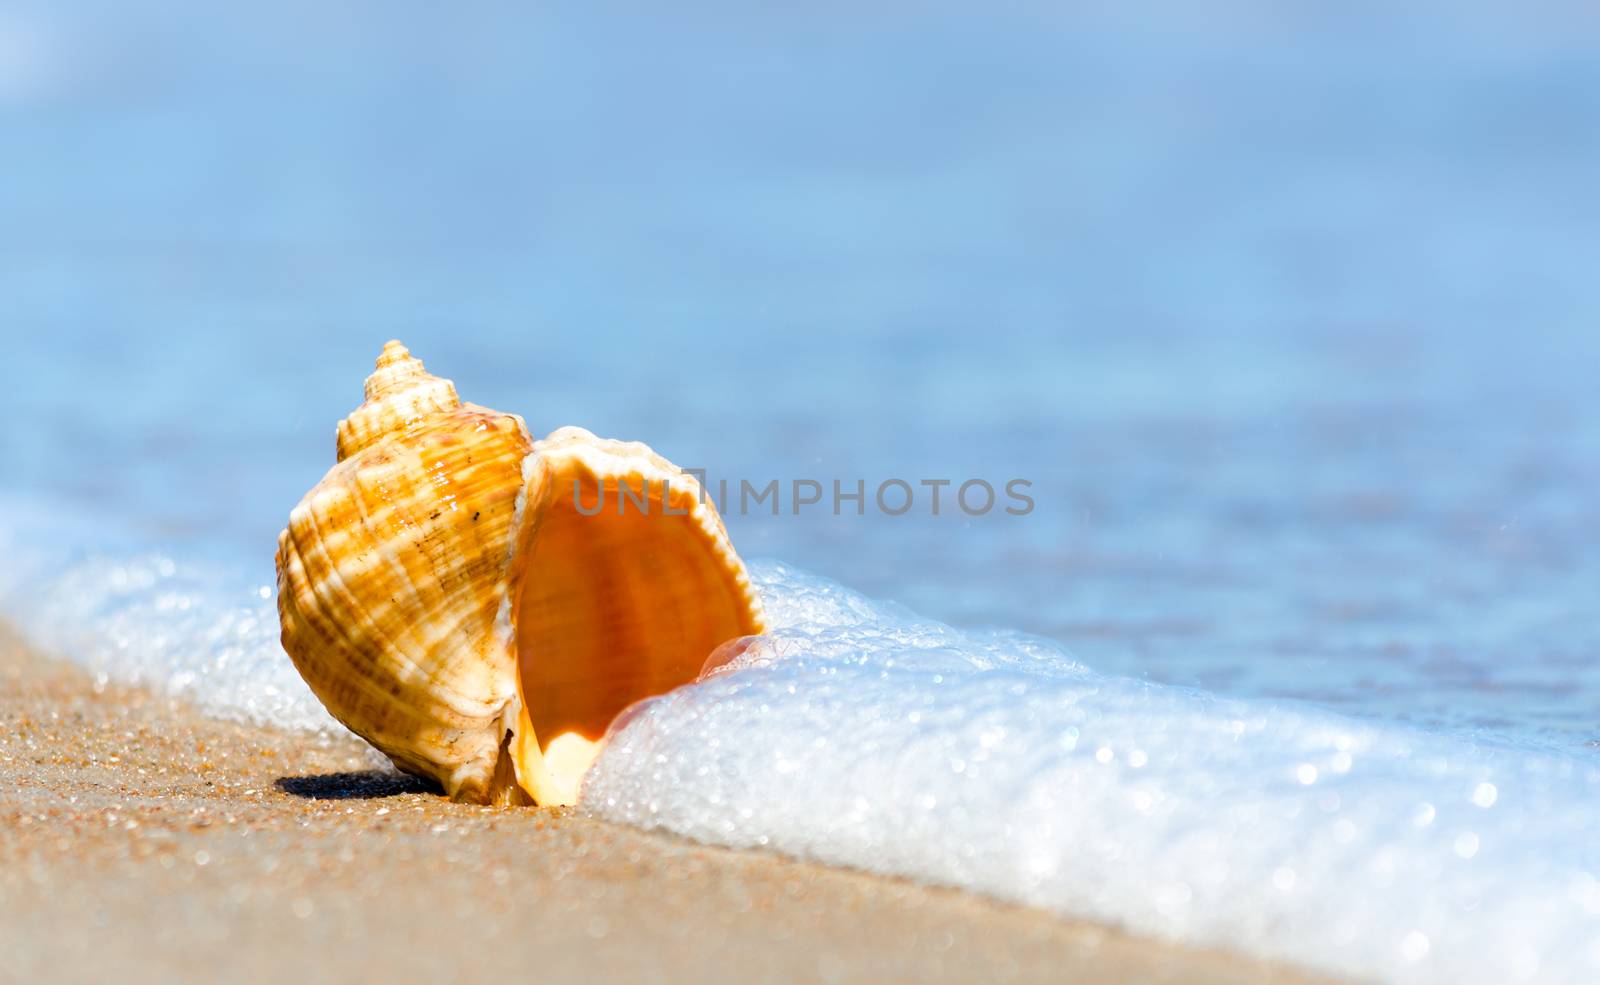 seashell closeup on the sand of a resort beach without people in by Gera8th